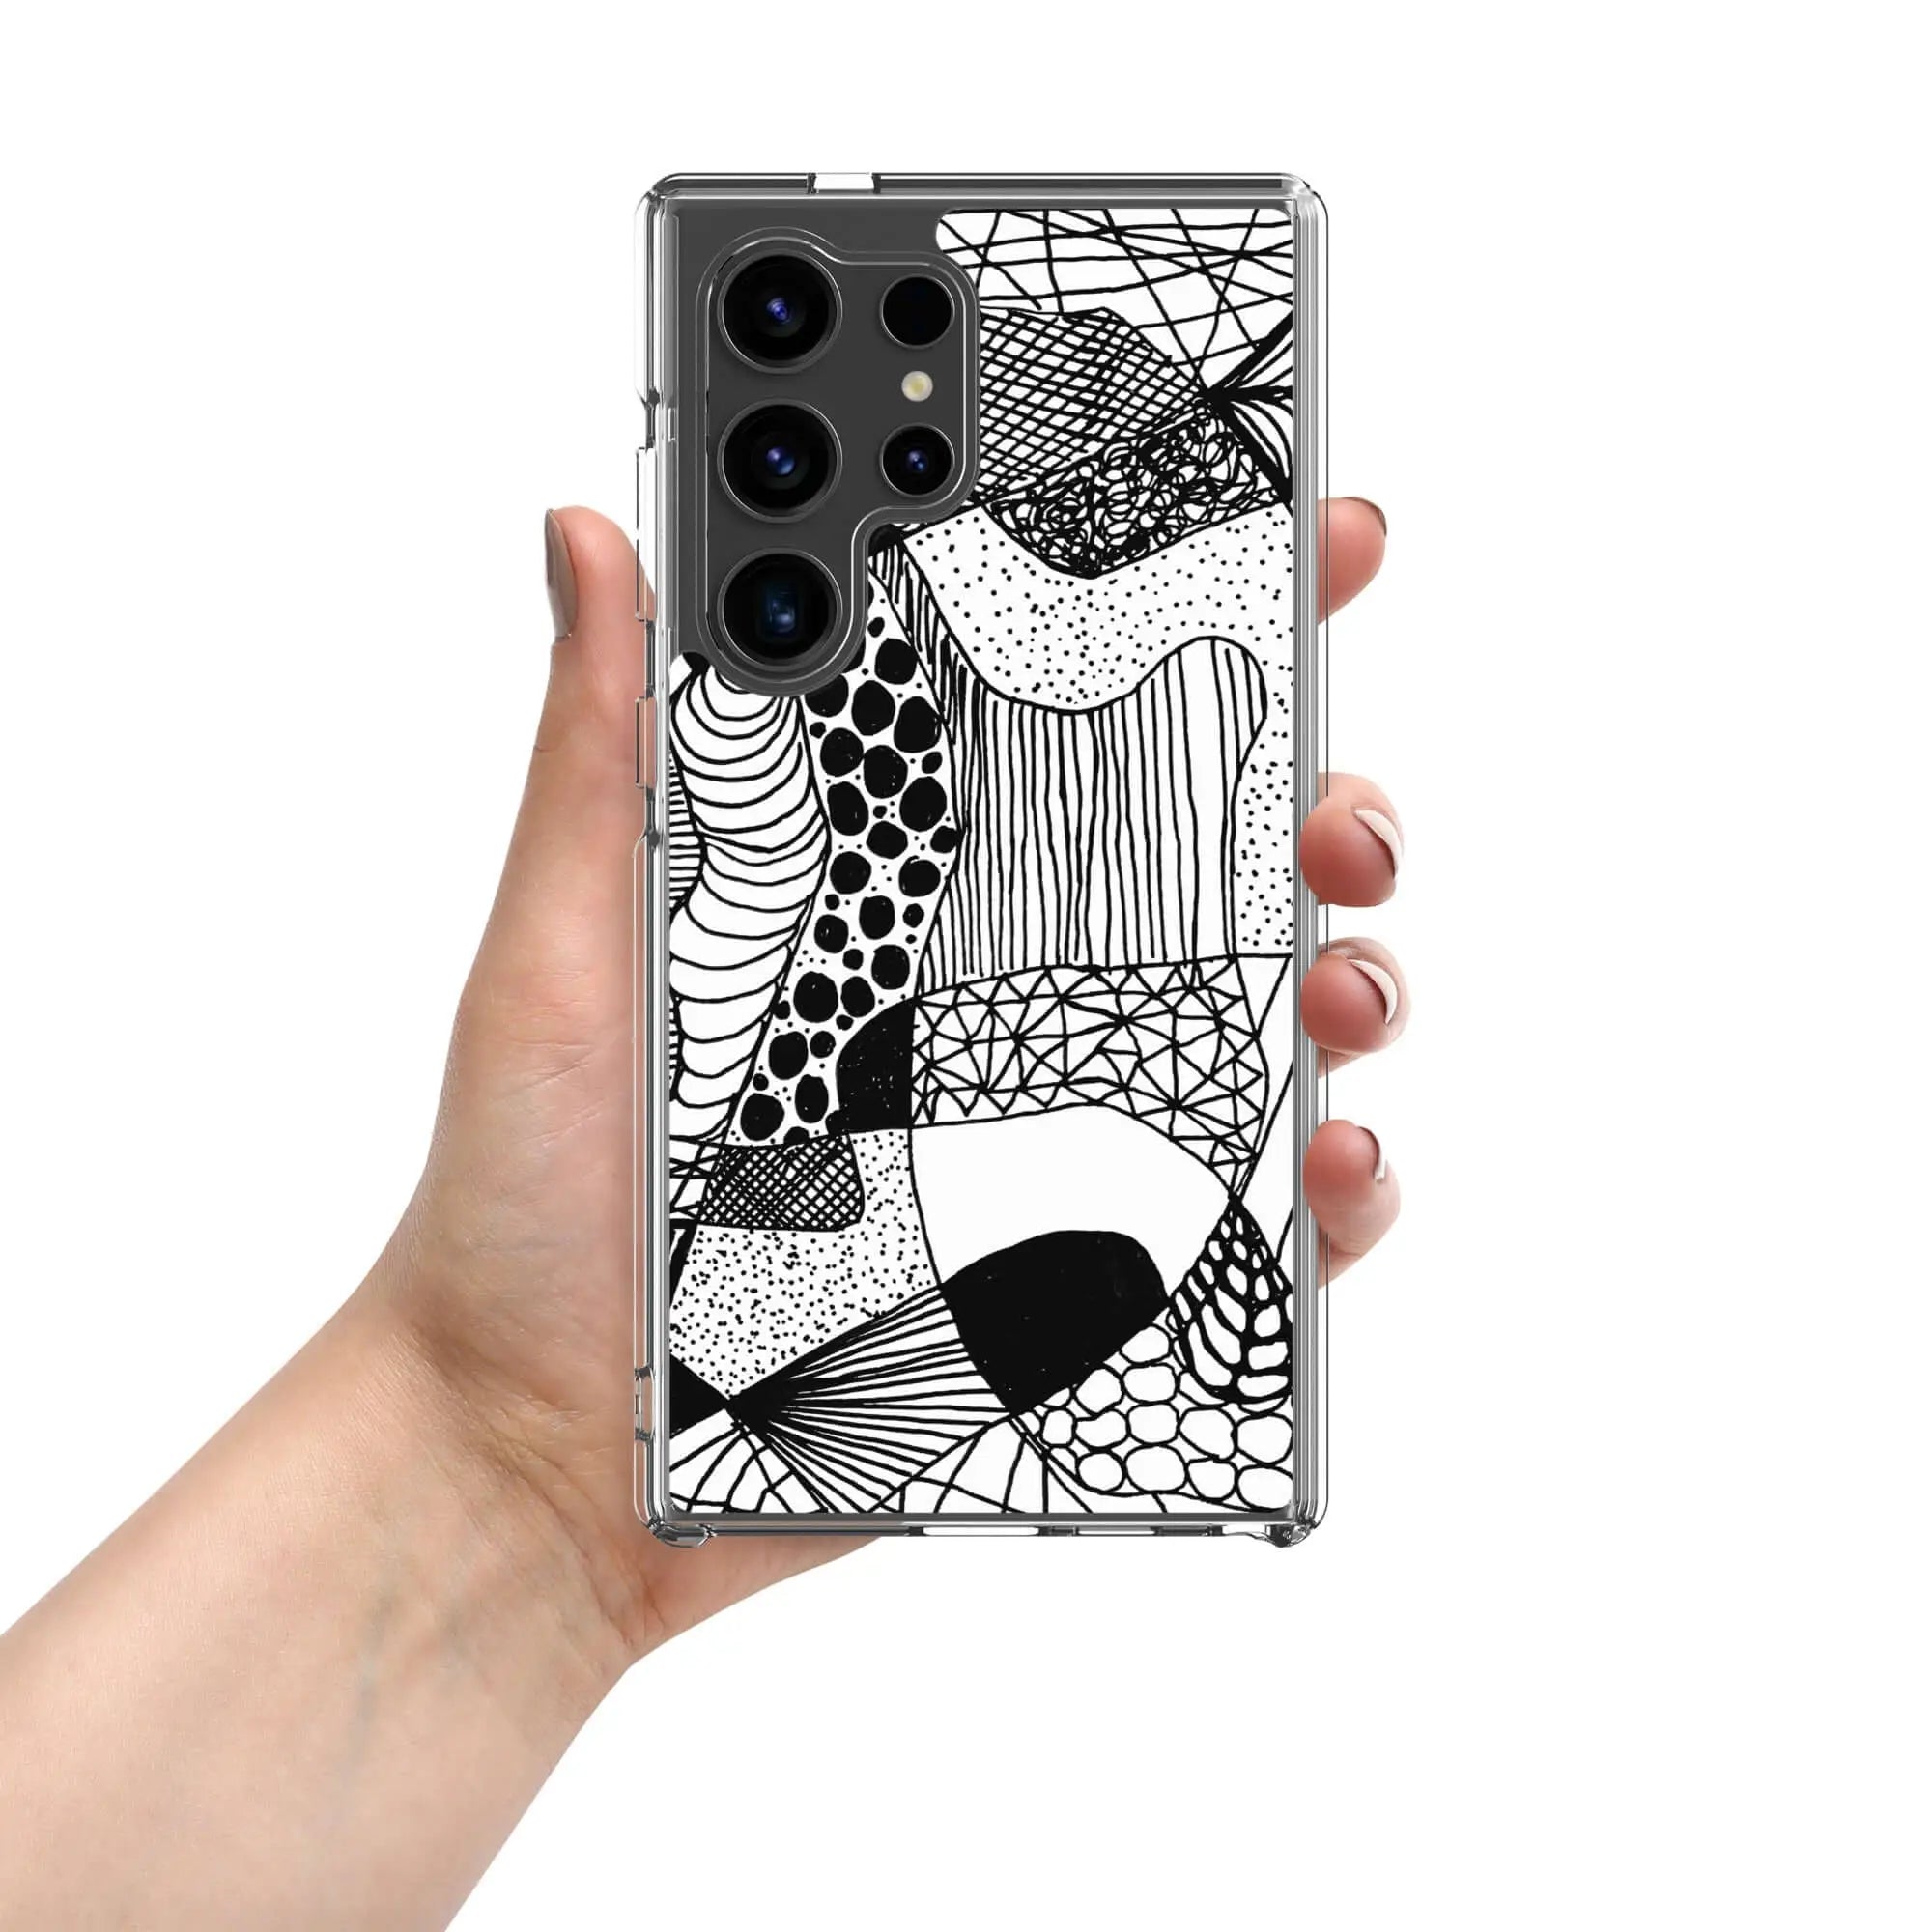 Samsung graphic abstract phone case in black and white